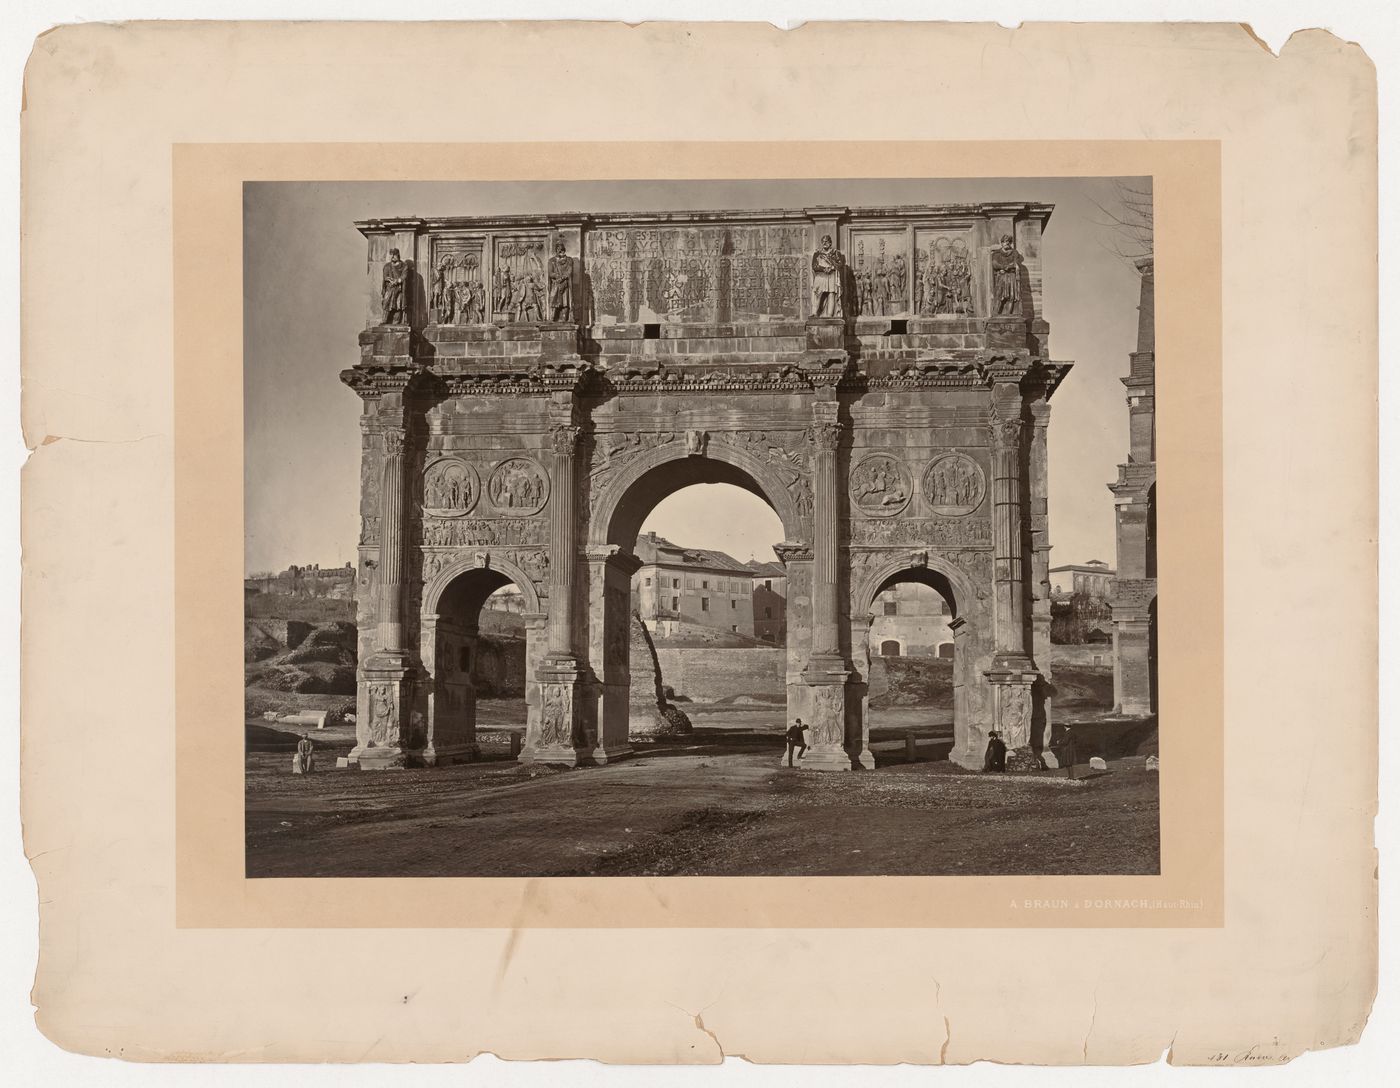 View of Arch of Constantine, Rome, Italy